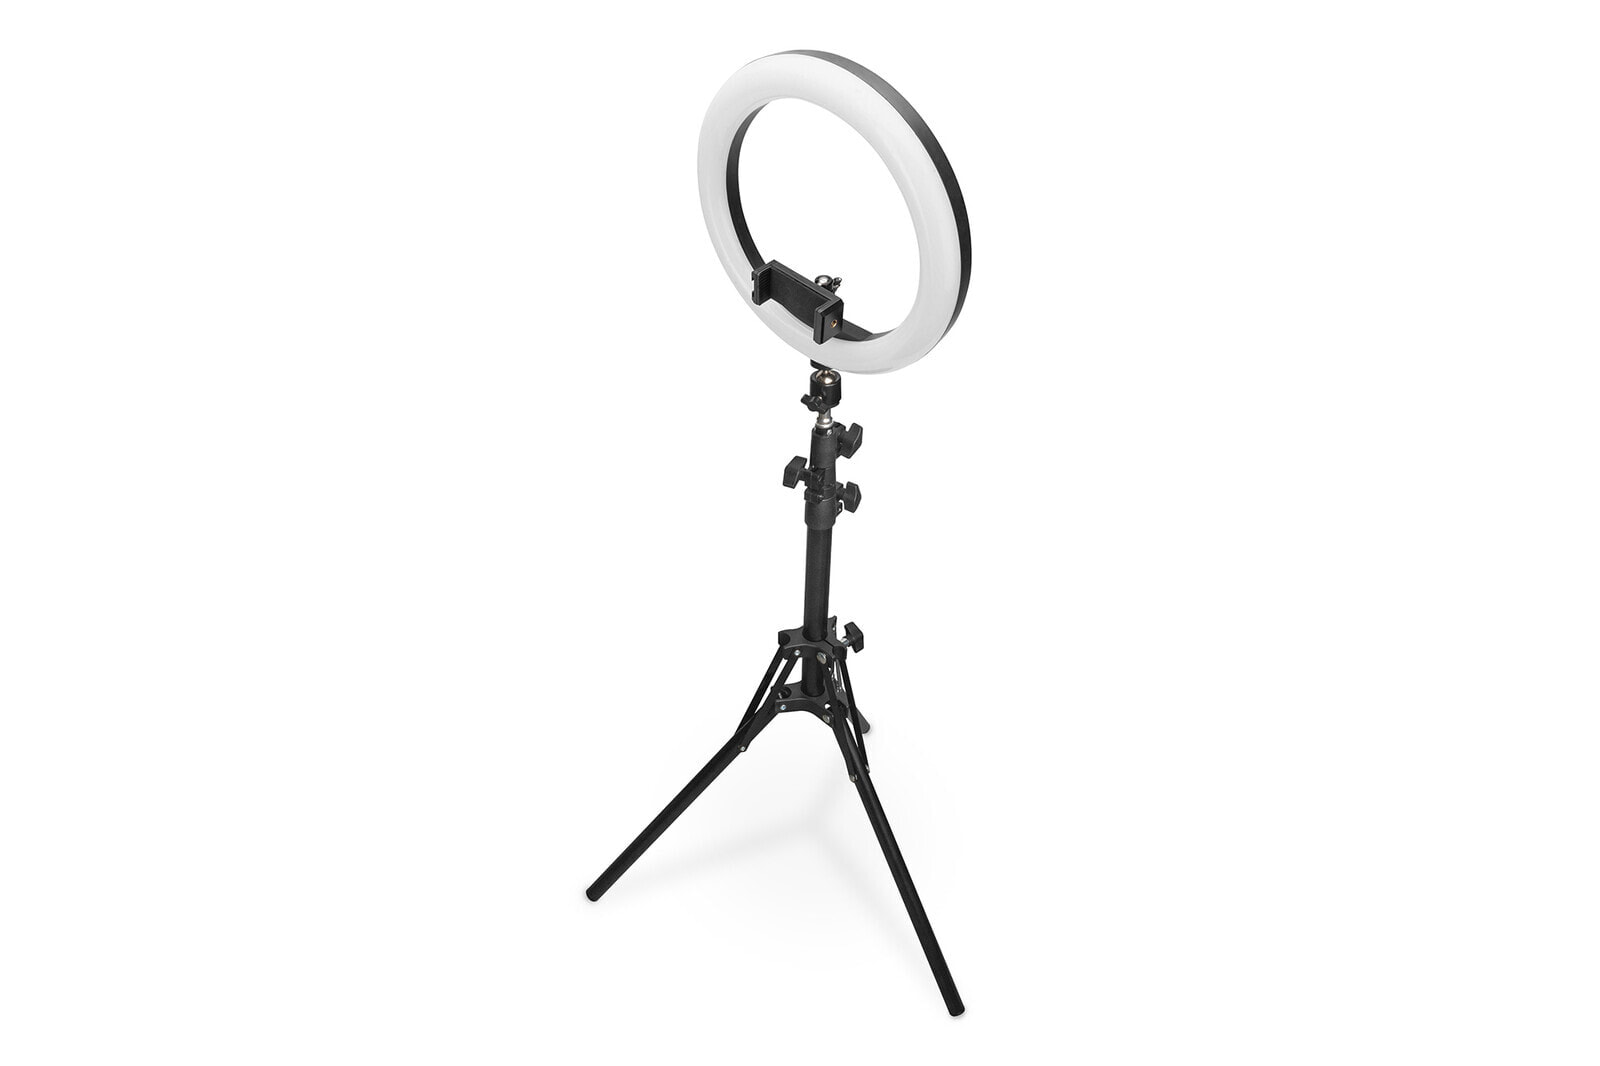 LED Ring Light 10 inch, extendable tripod stand